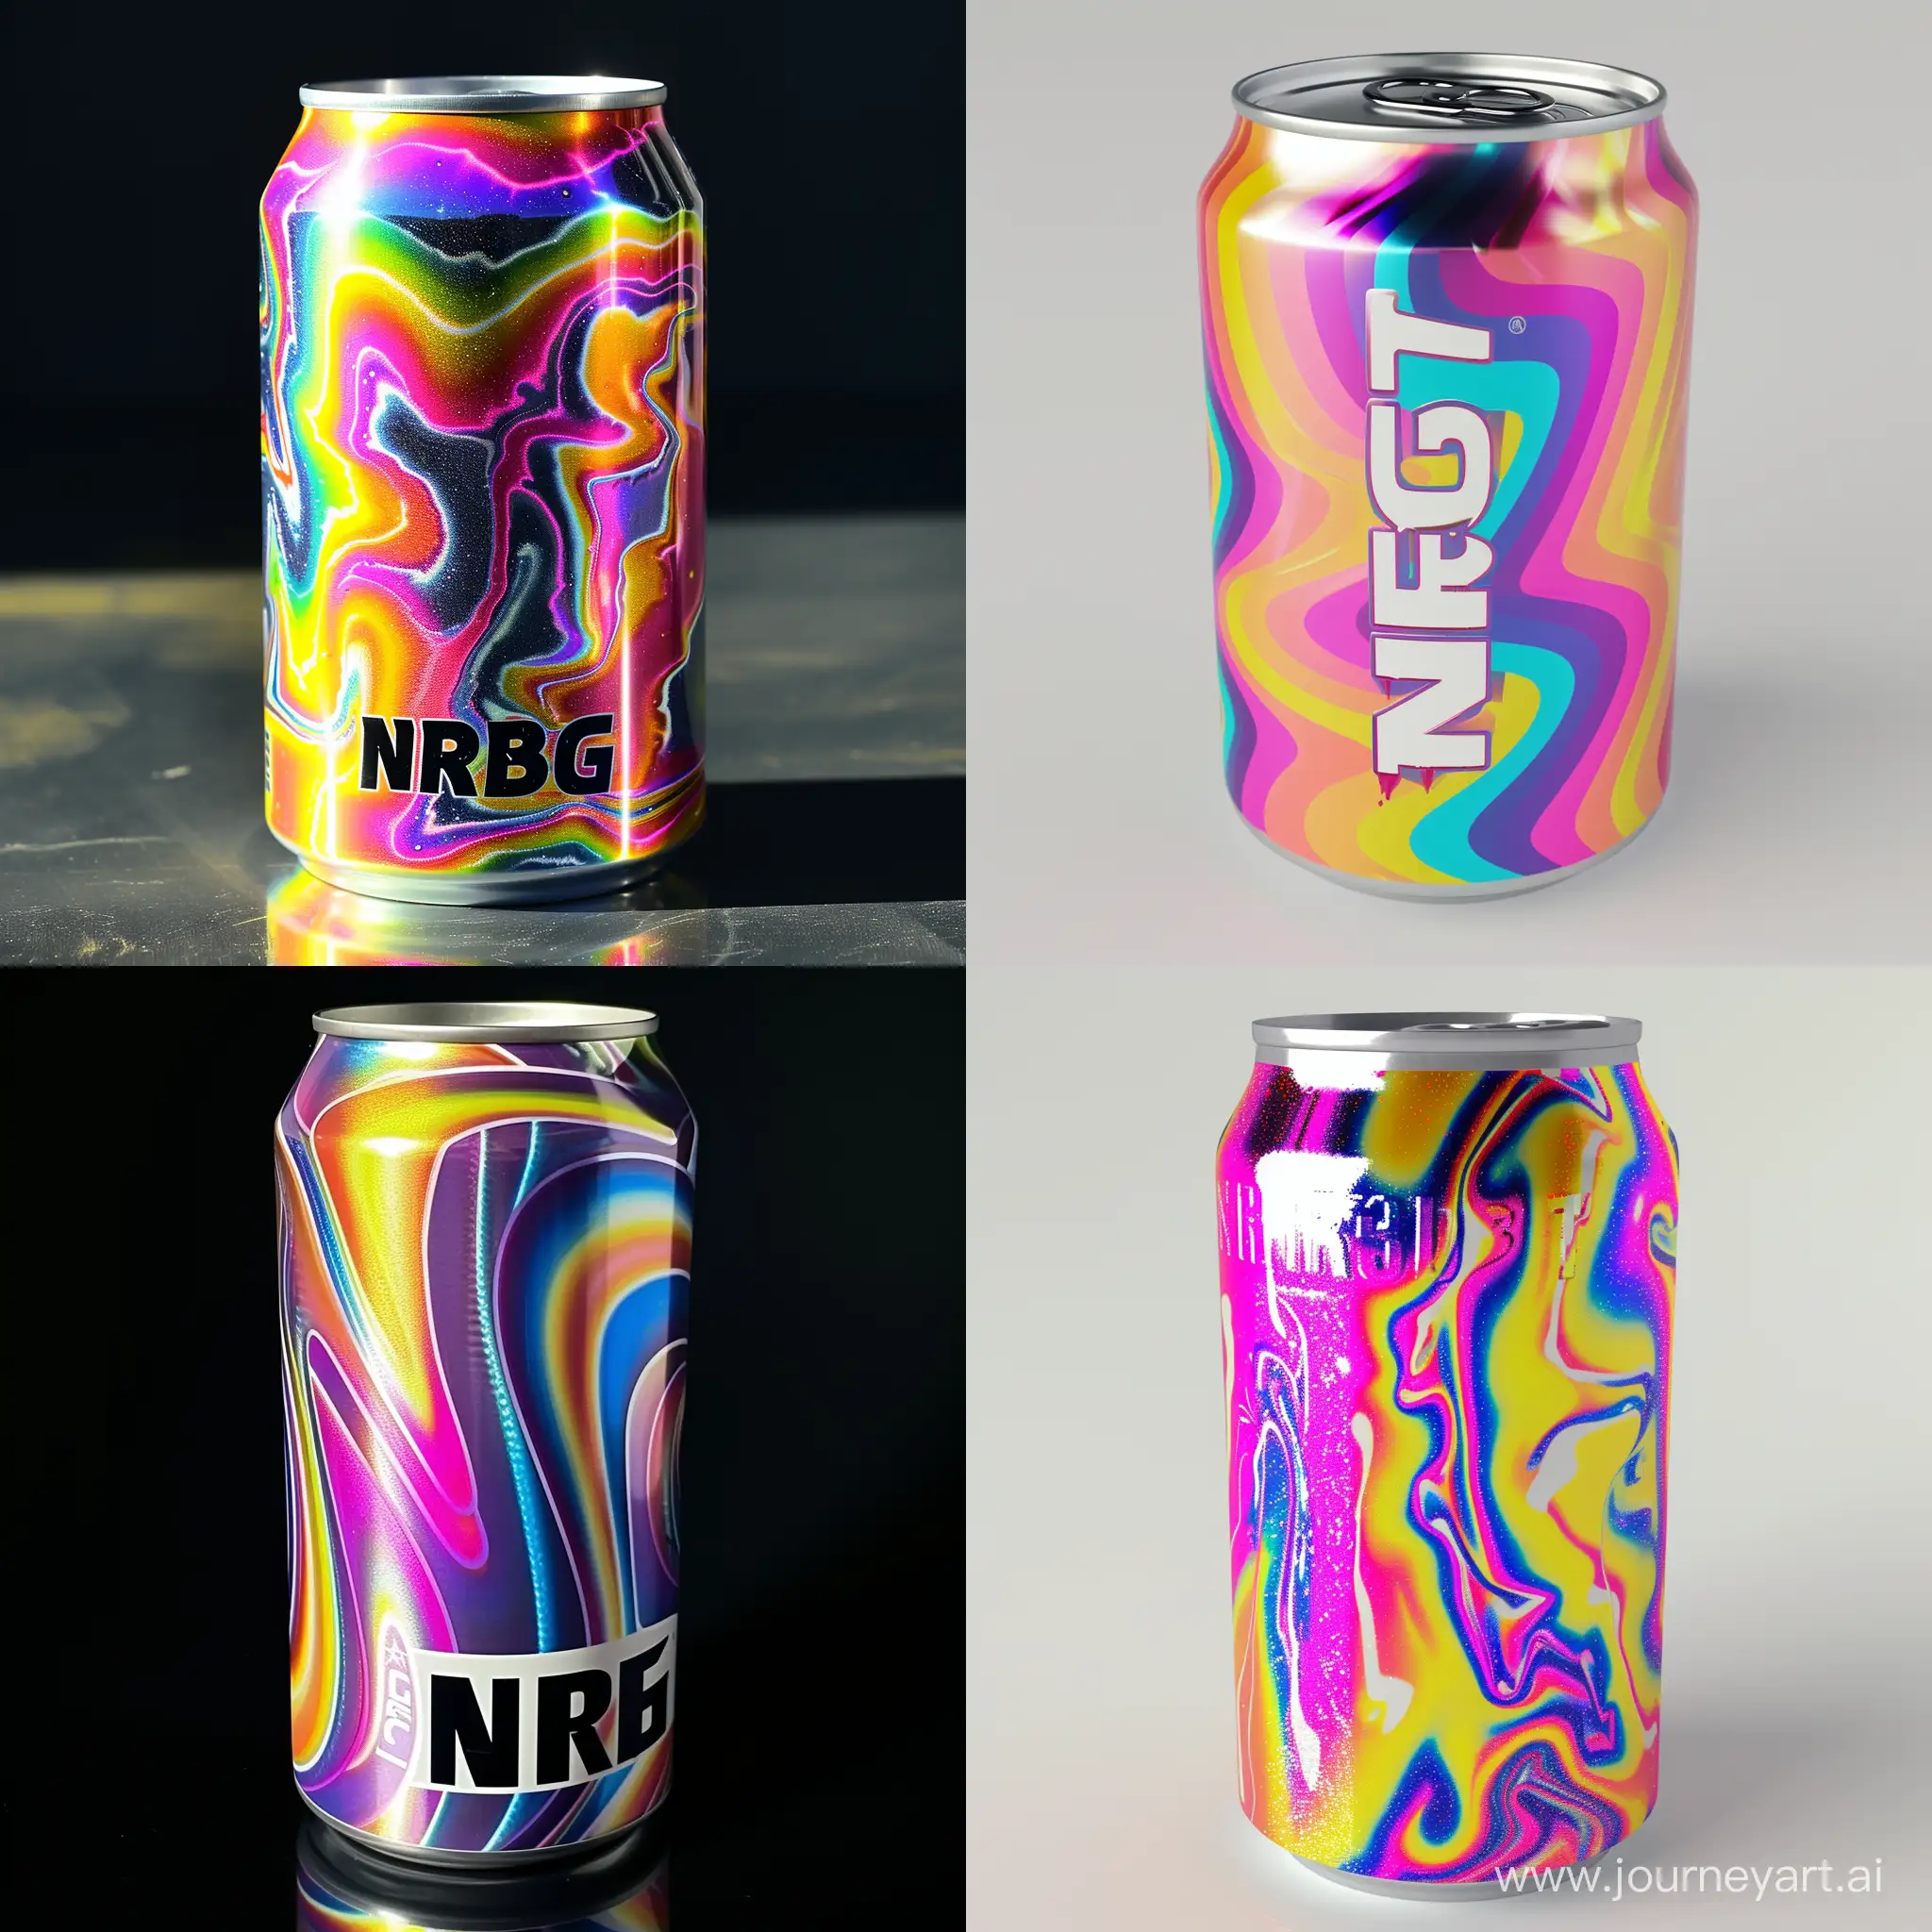 Make a aluminium can, energy drink with a lot of different colors. Make it say NRGBT on the front